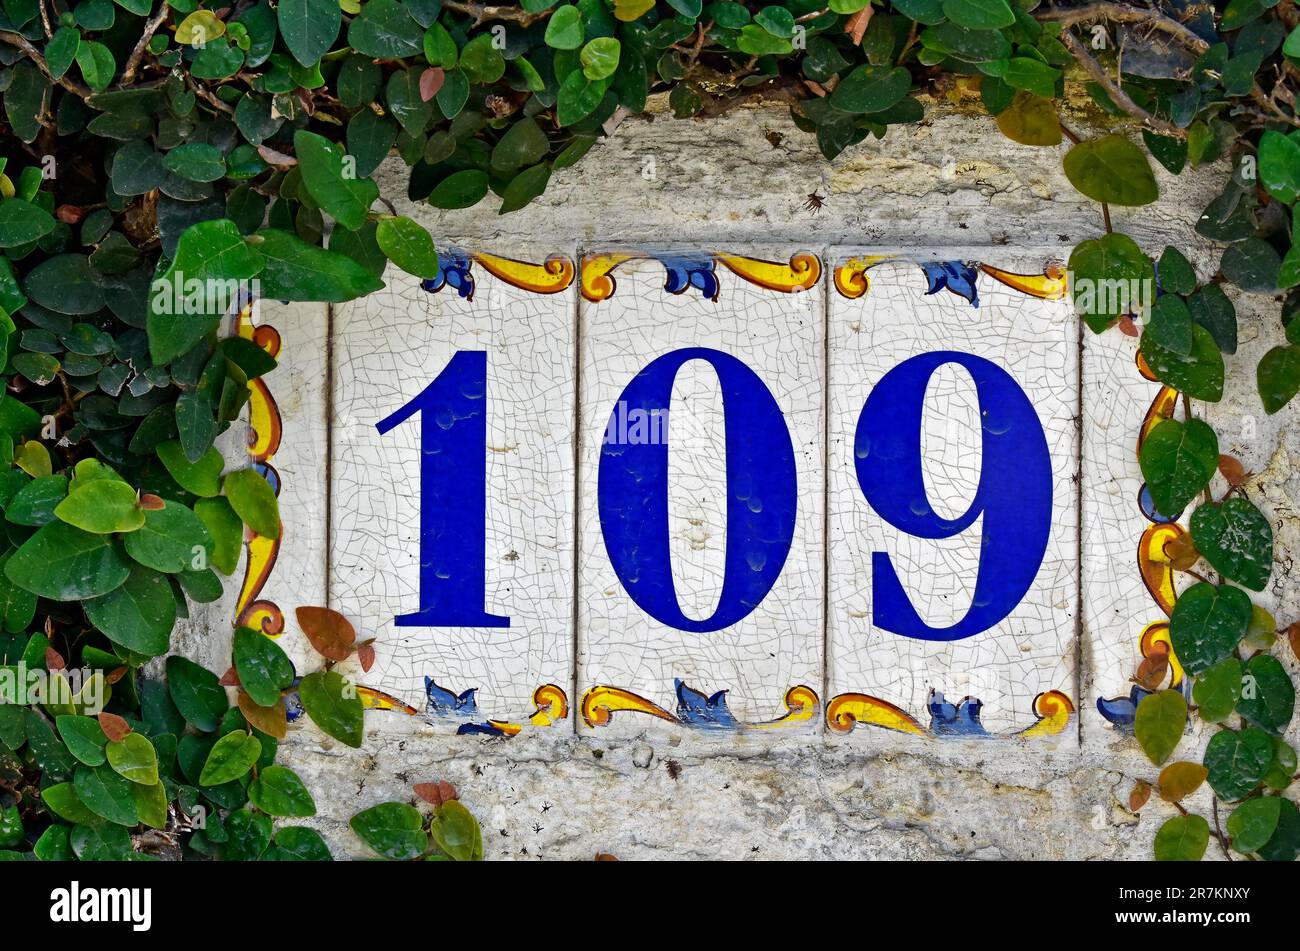 Street sign number 109 on a wall with plants Stock Photo